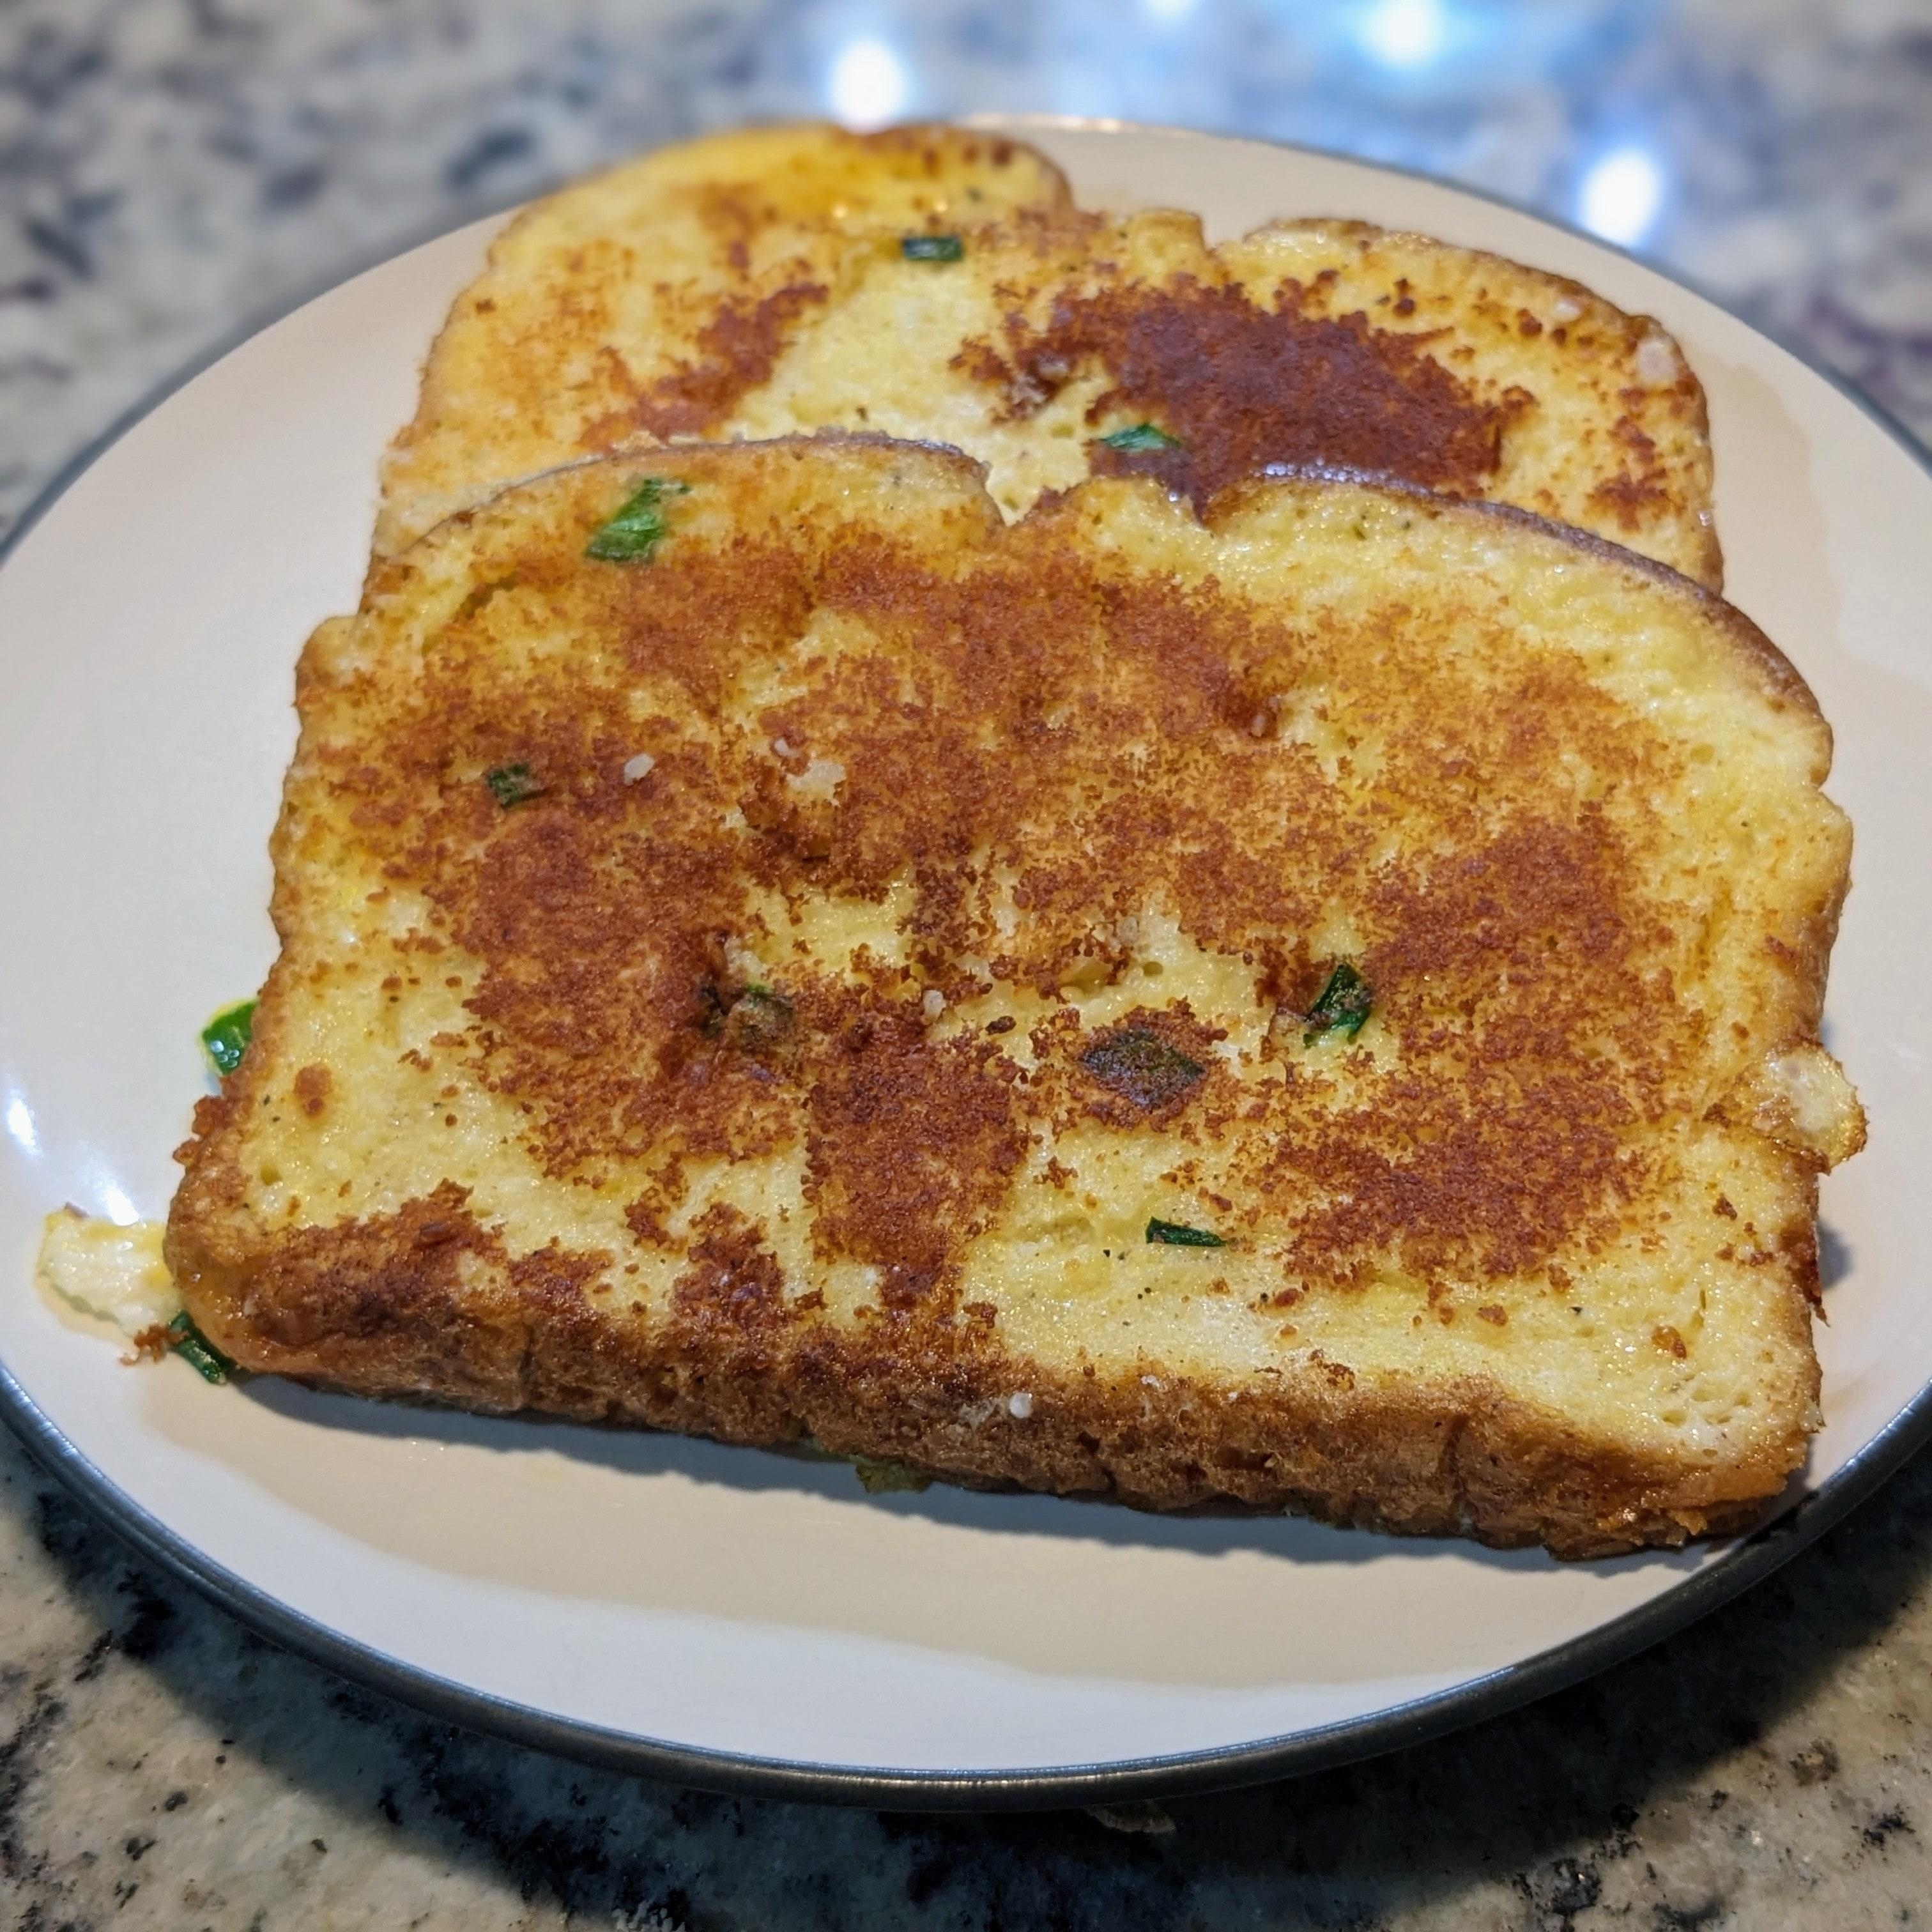 A plate with a single slice of grilled bread with herbs